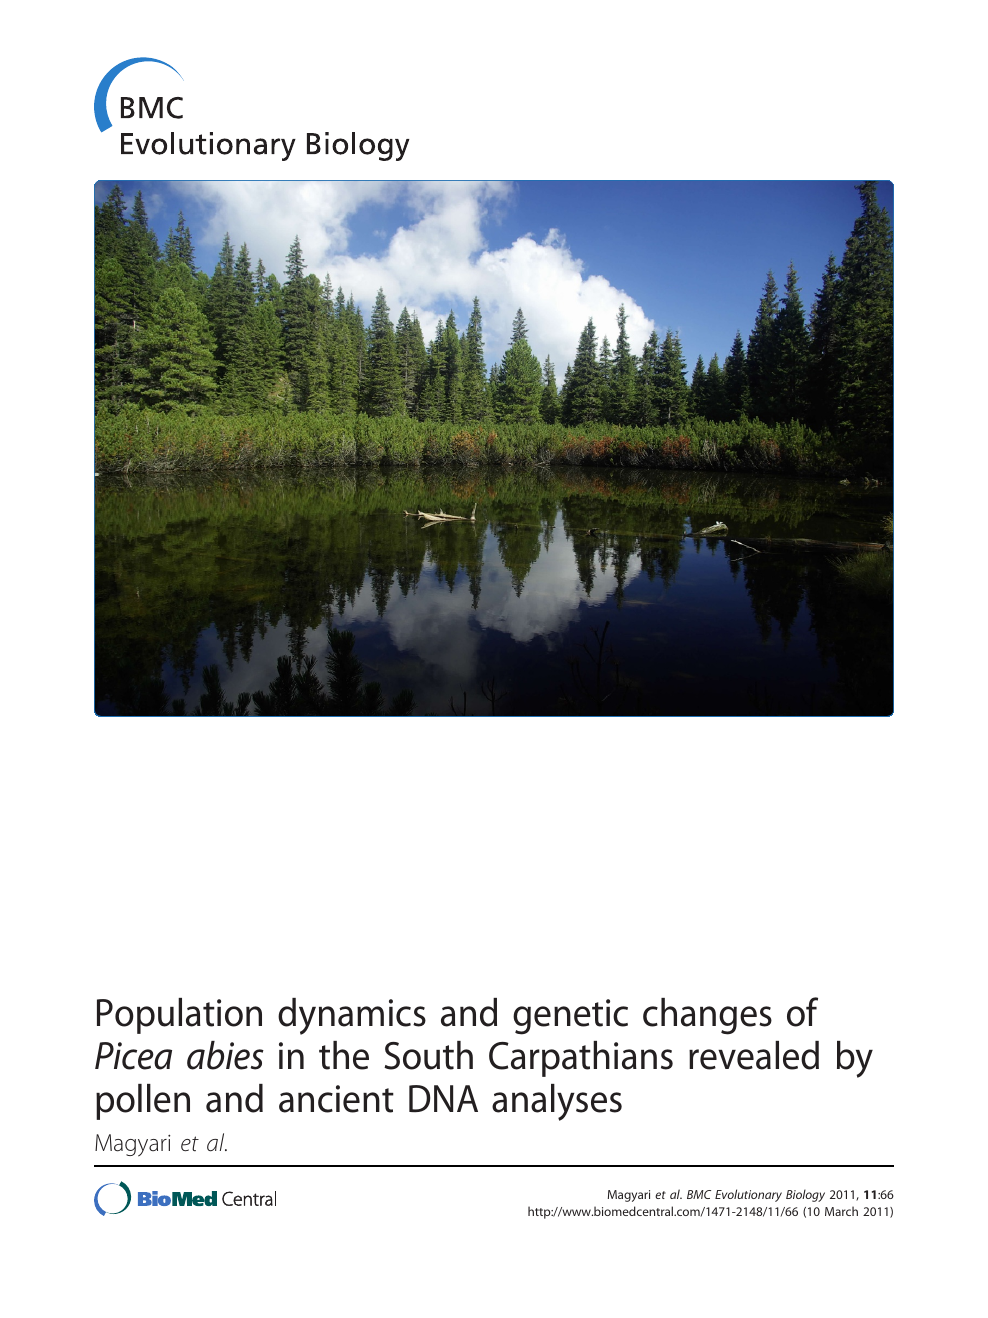 genetic changes of Picea abies 